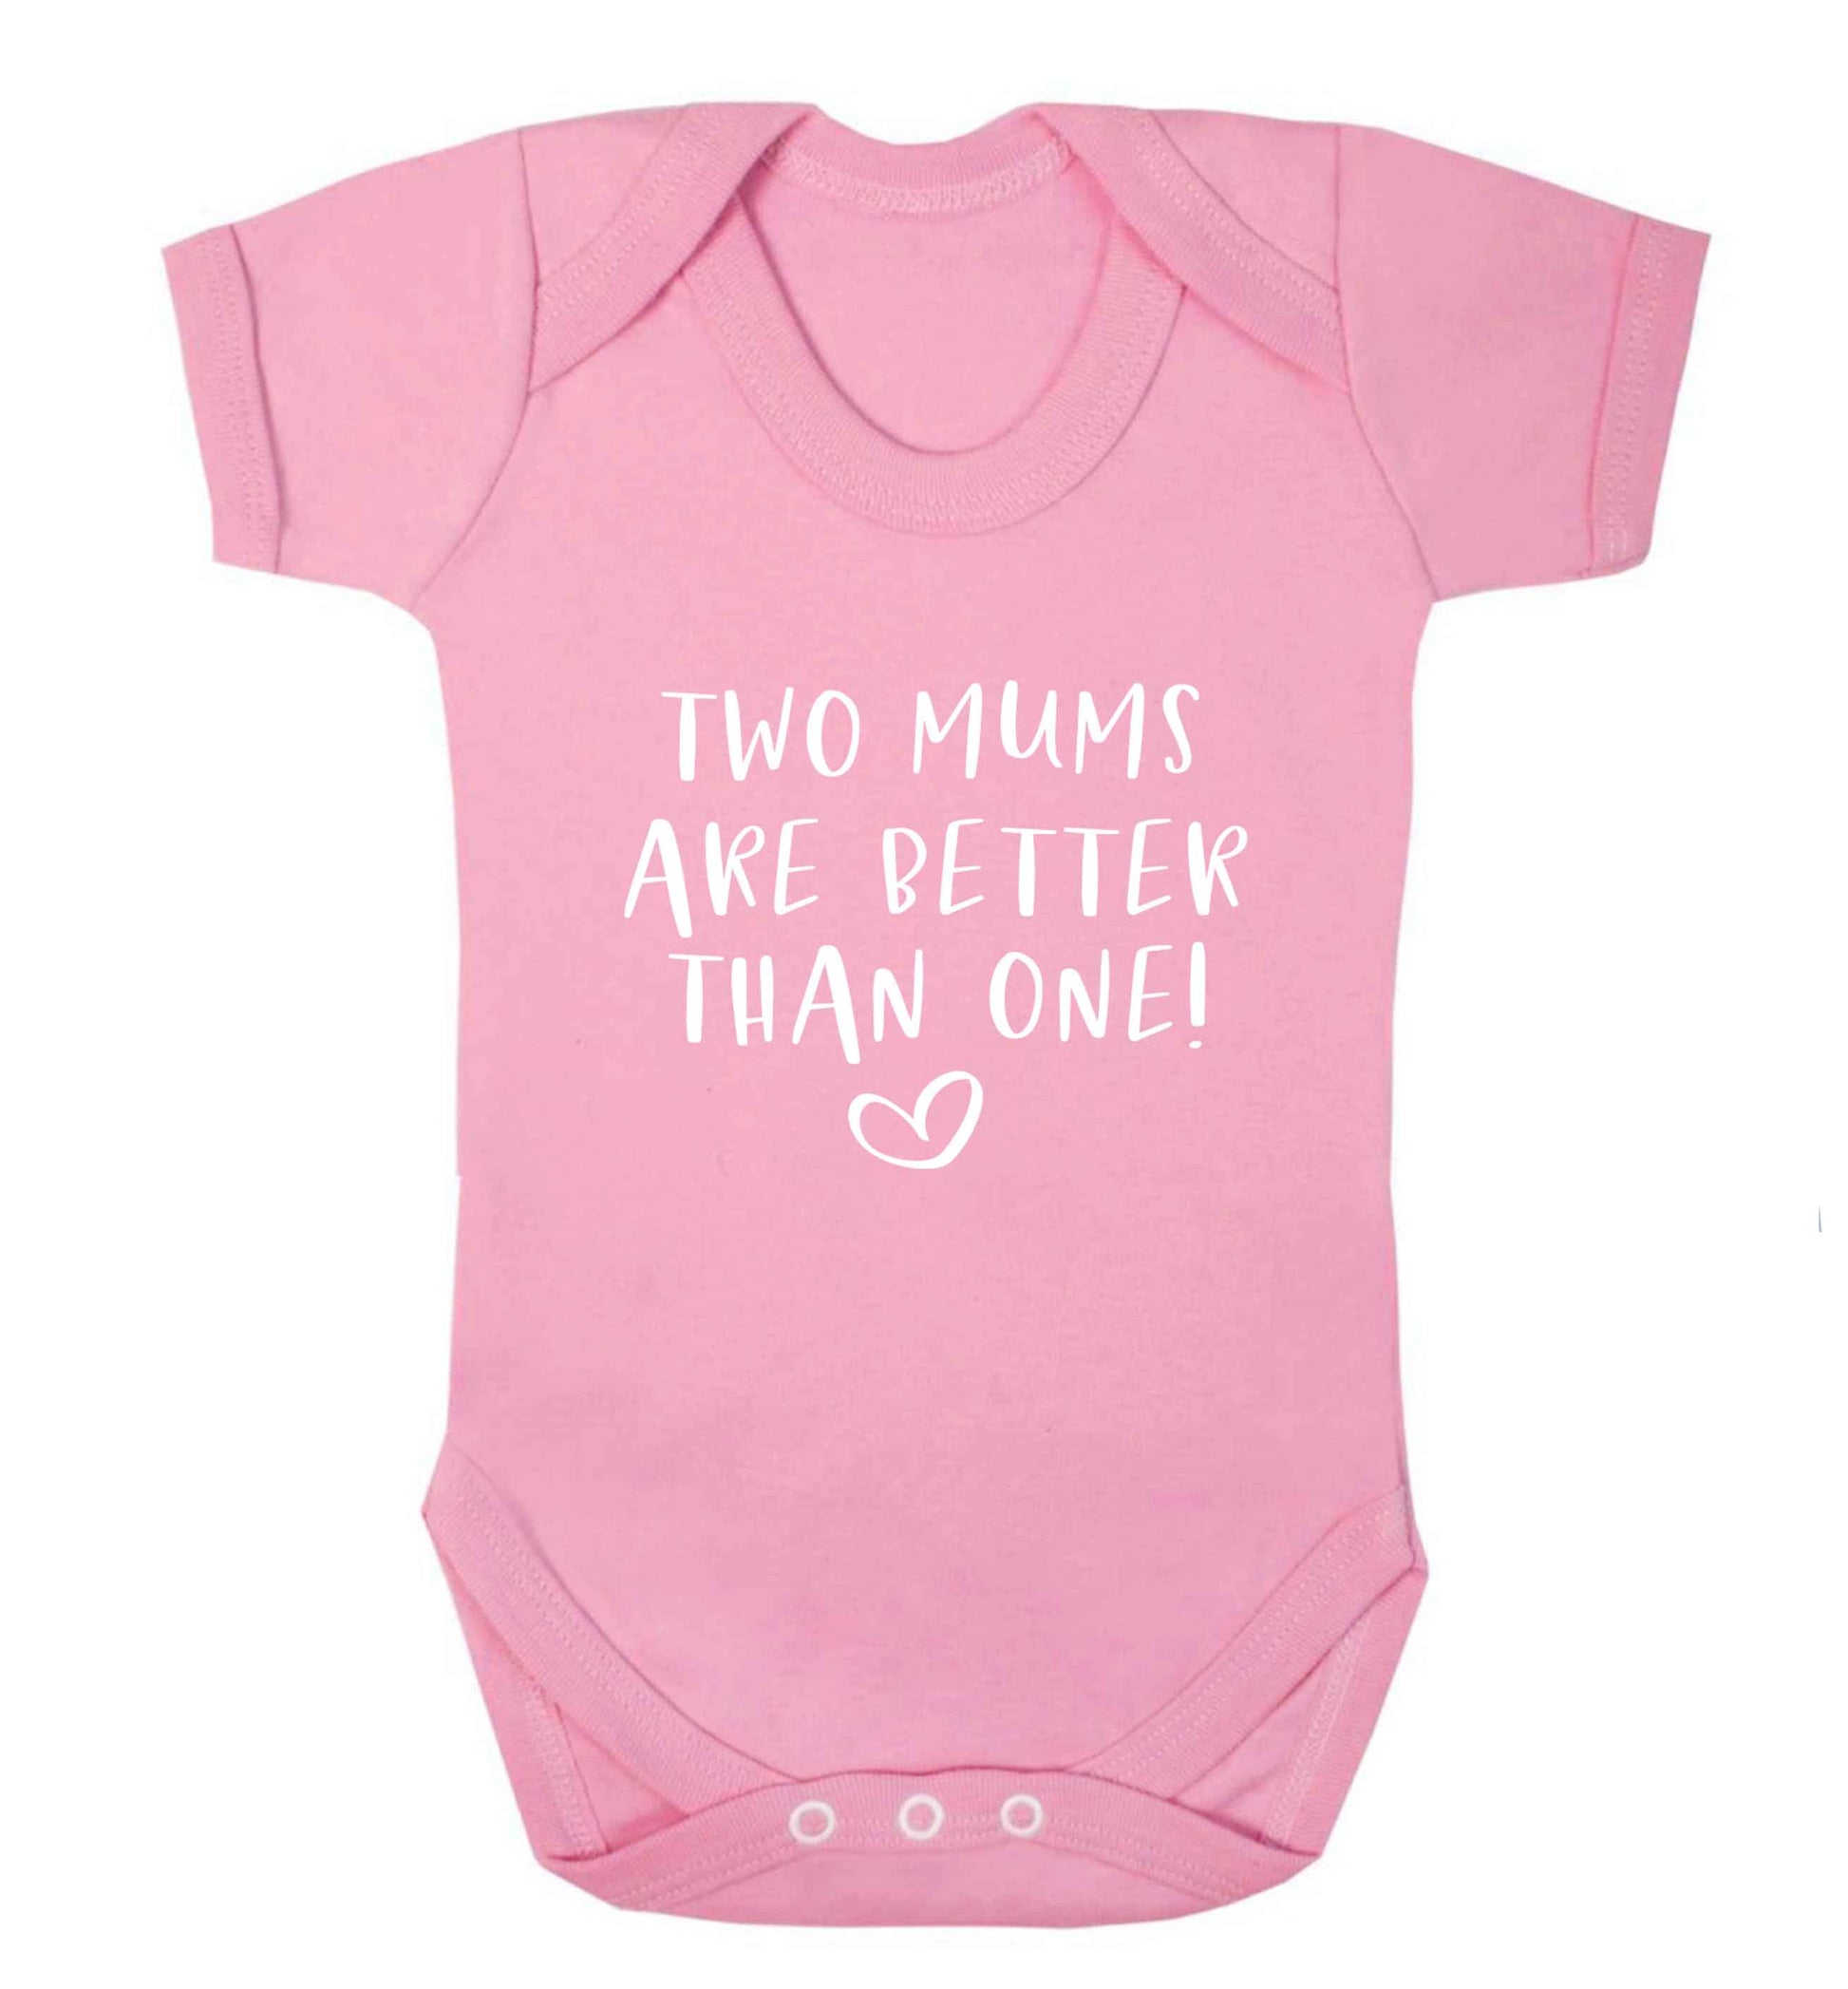 Two mums are better than one baby vest pale pink 18-24 months